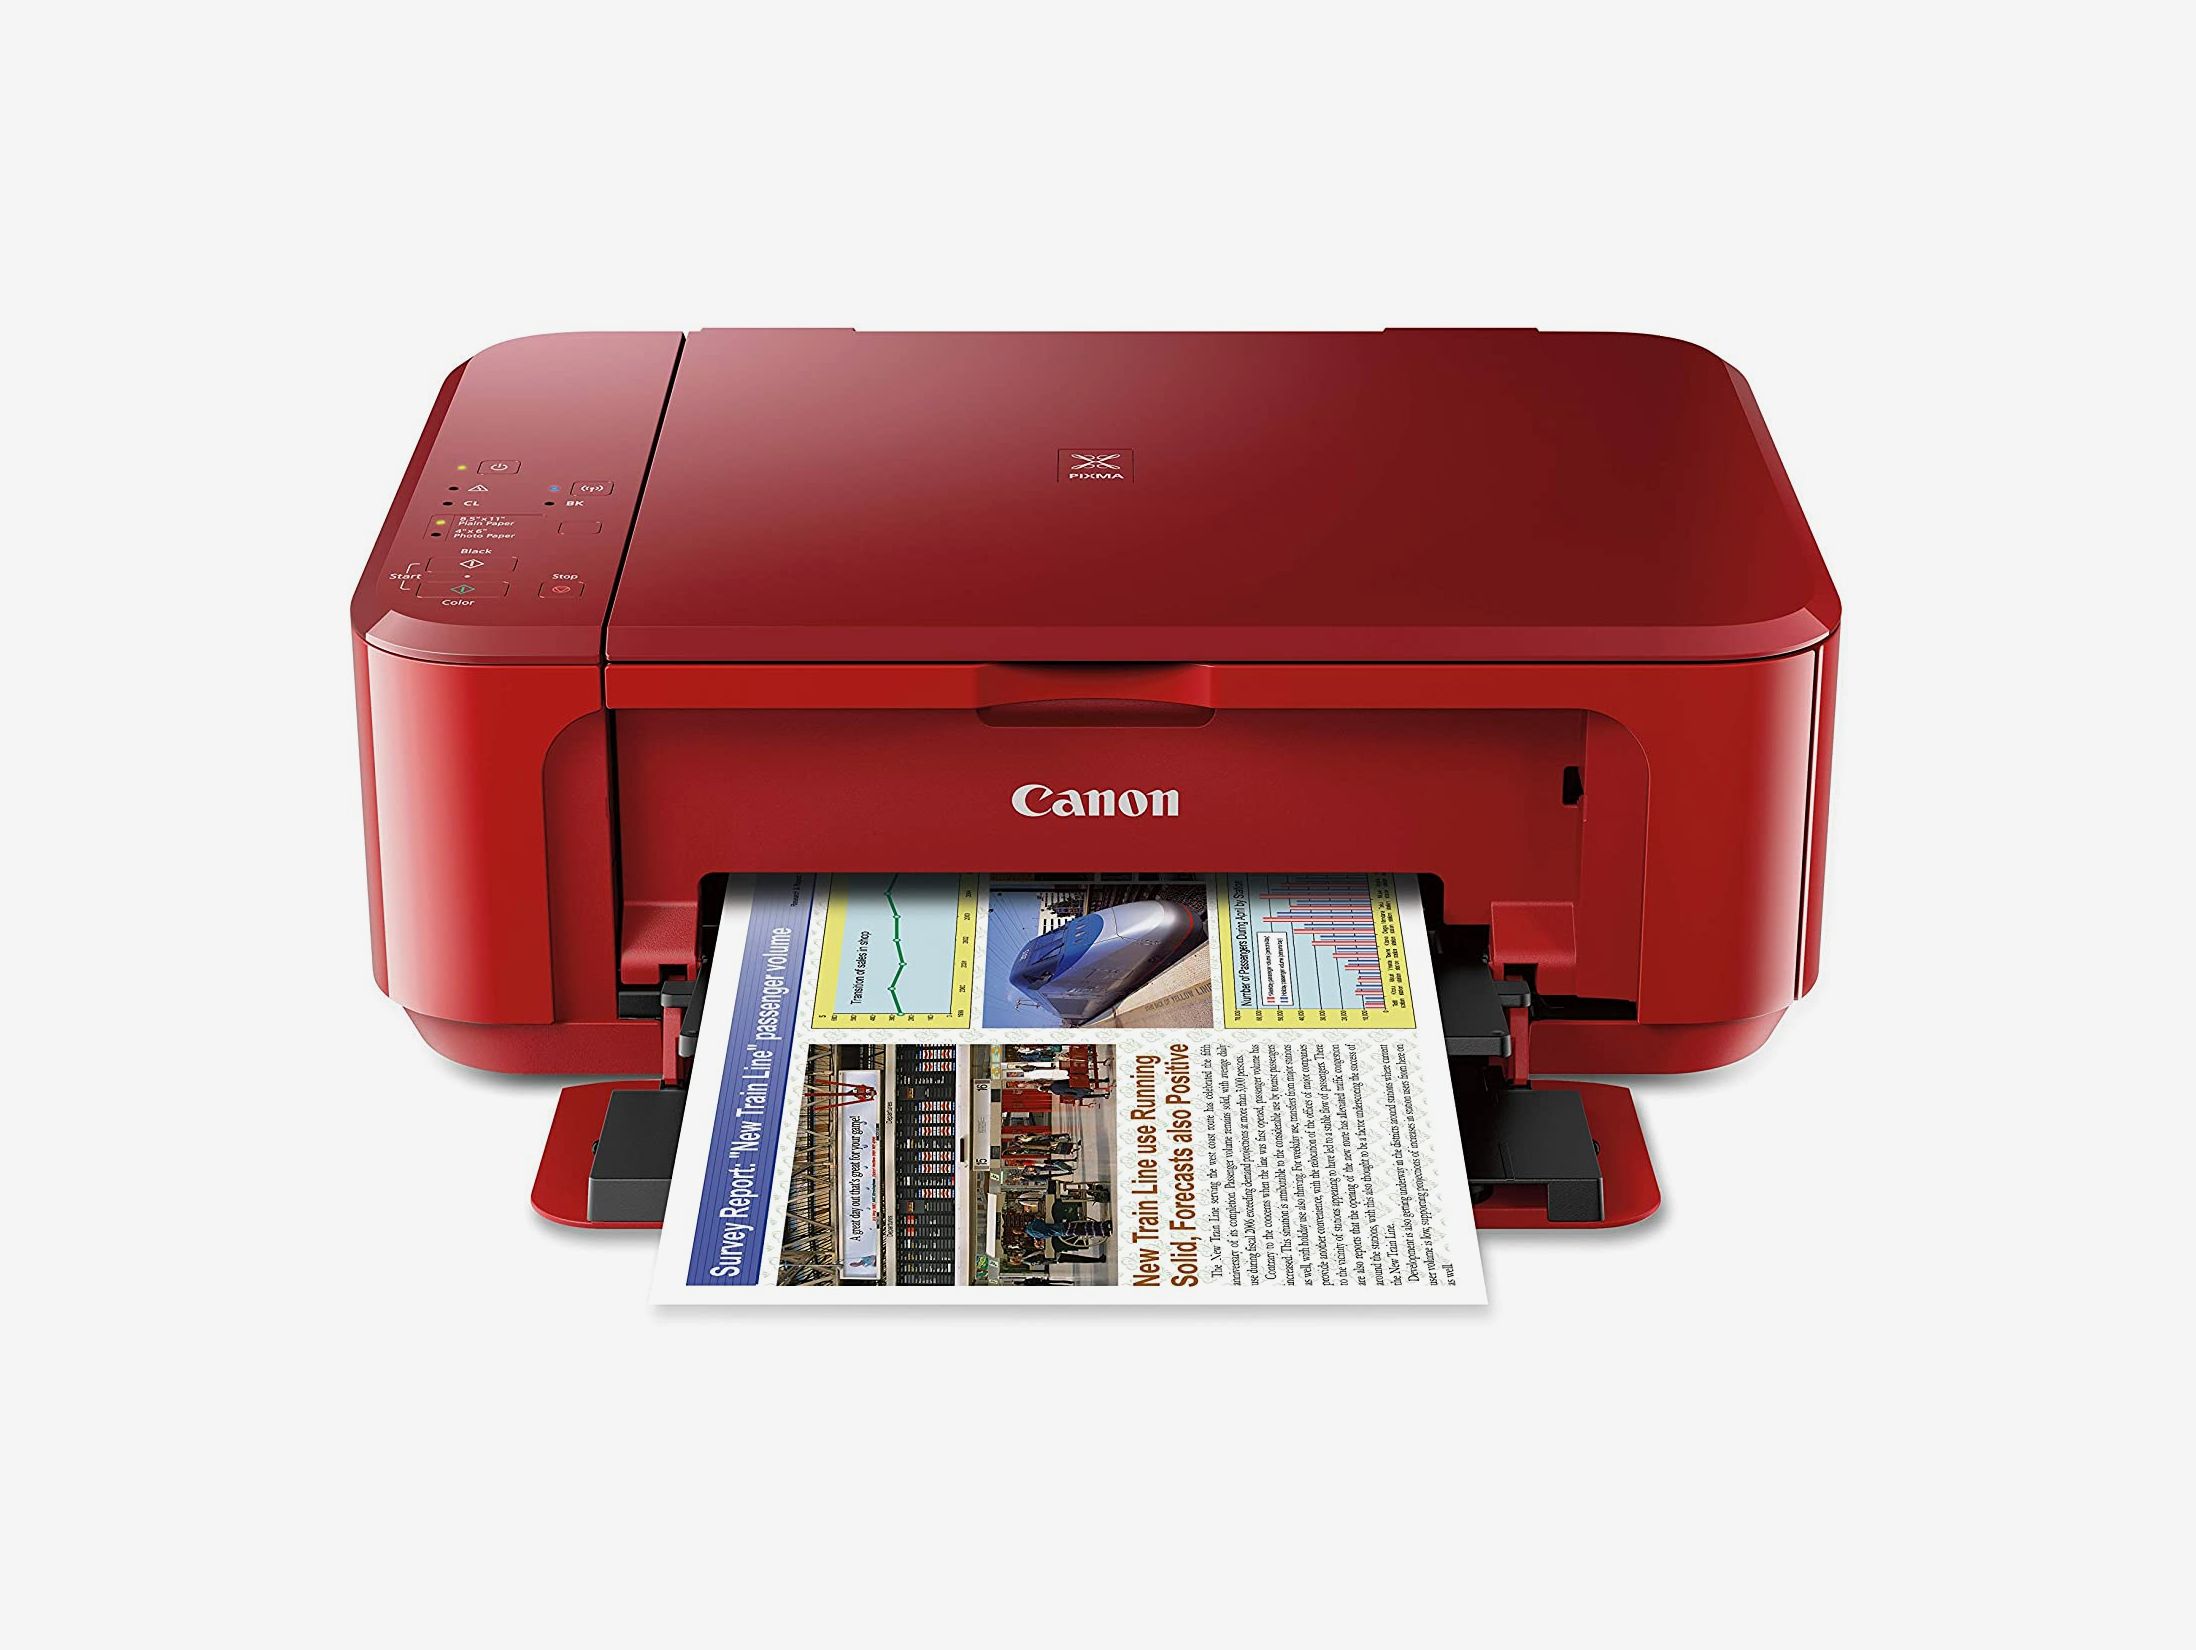 best home printer for mac 2018